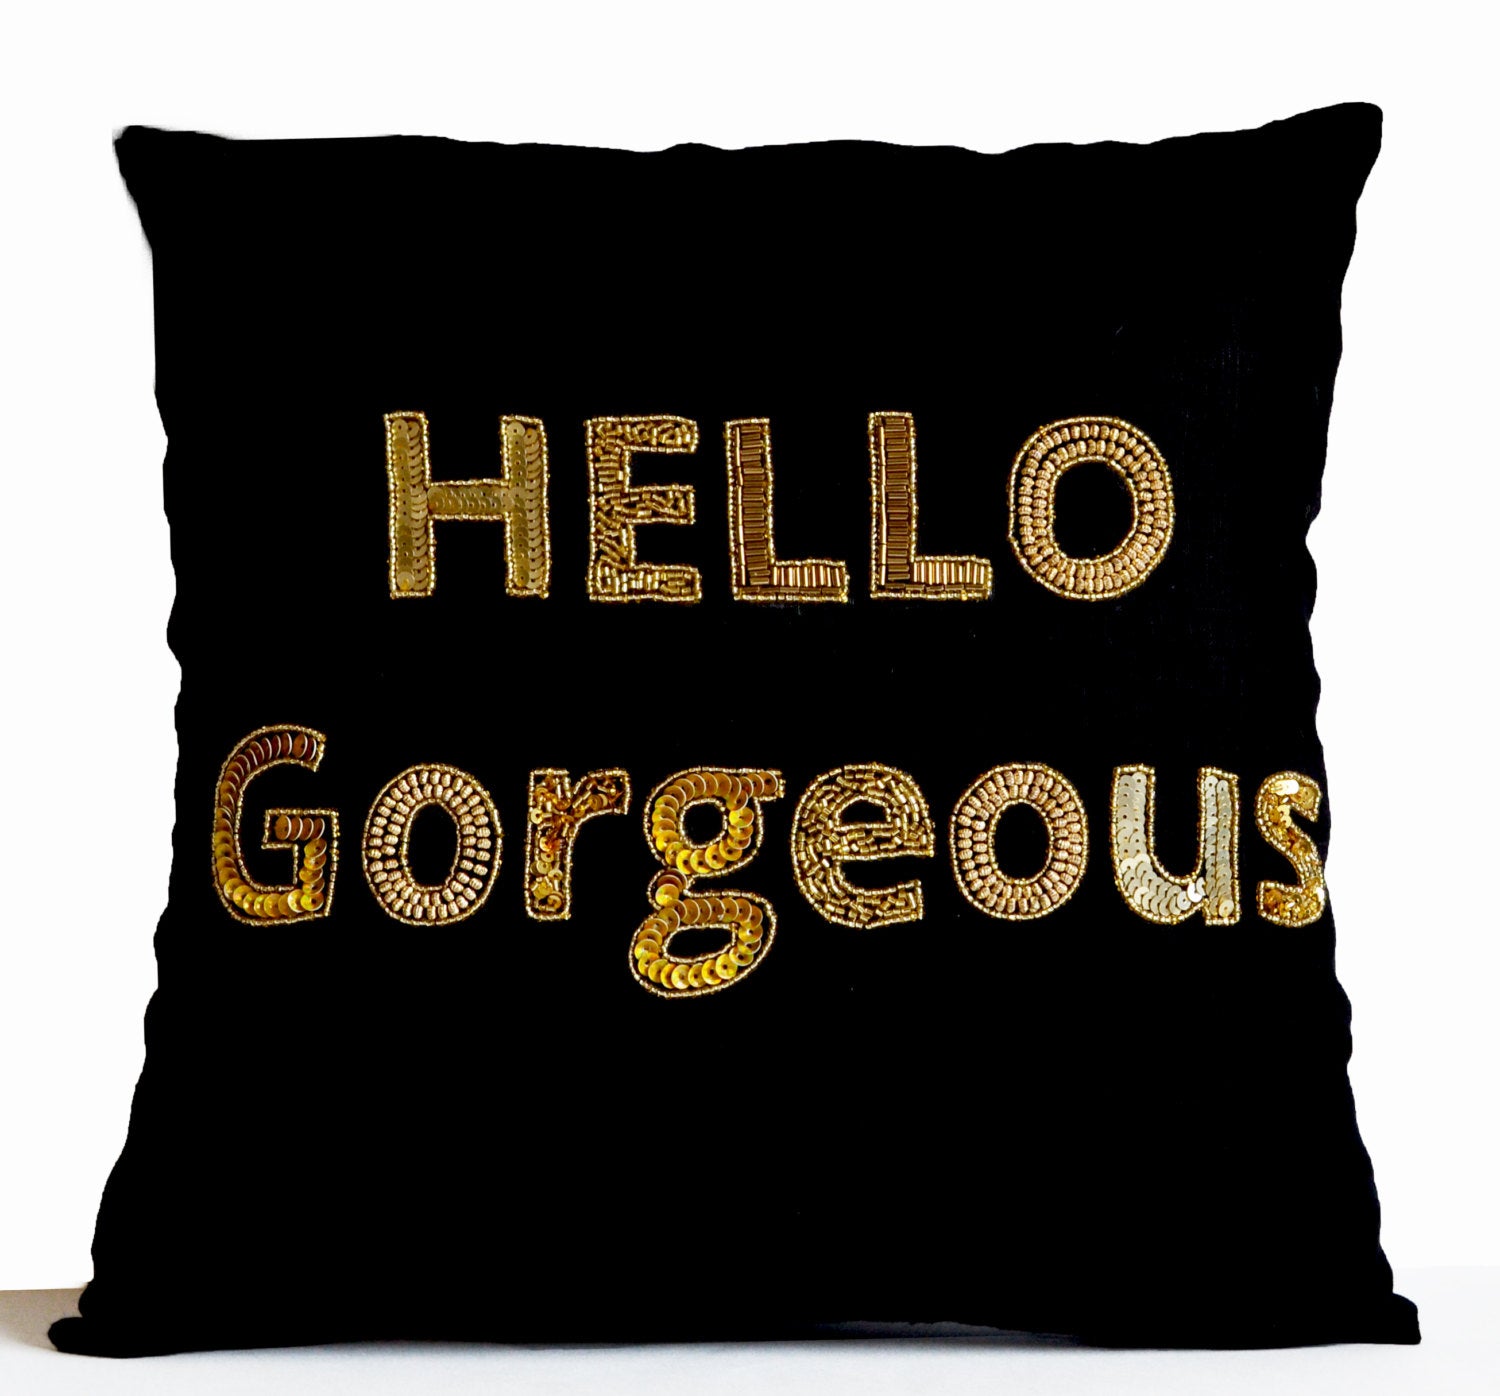 Amore Beaute Hello Gorgeous Pillow, Gold Sequins Pillow Cover, Beaded Throw Pillows, Black Gold Sequin Pillows